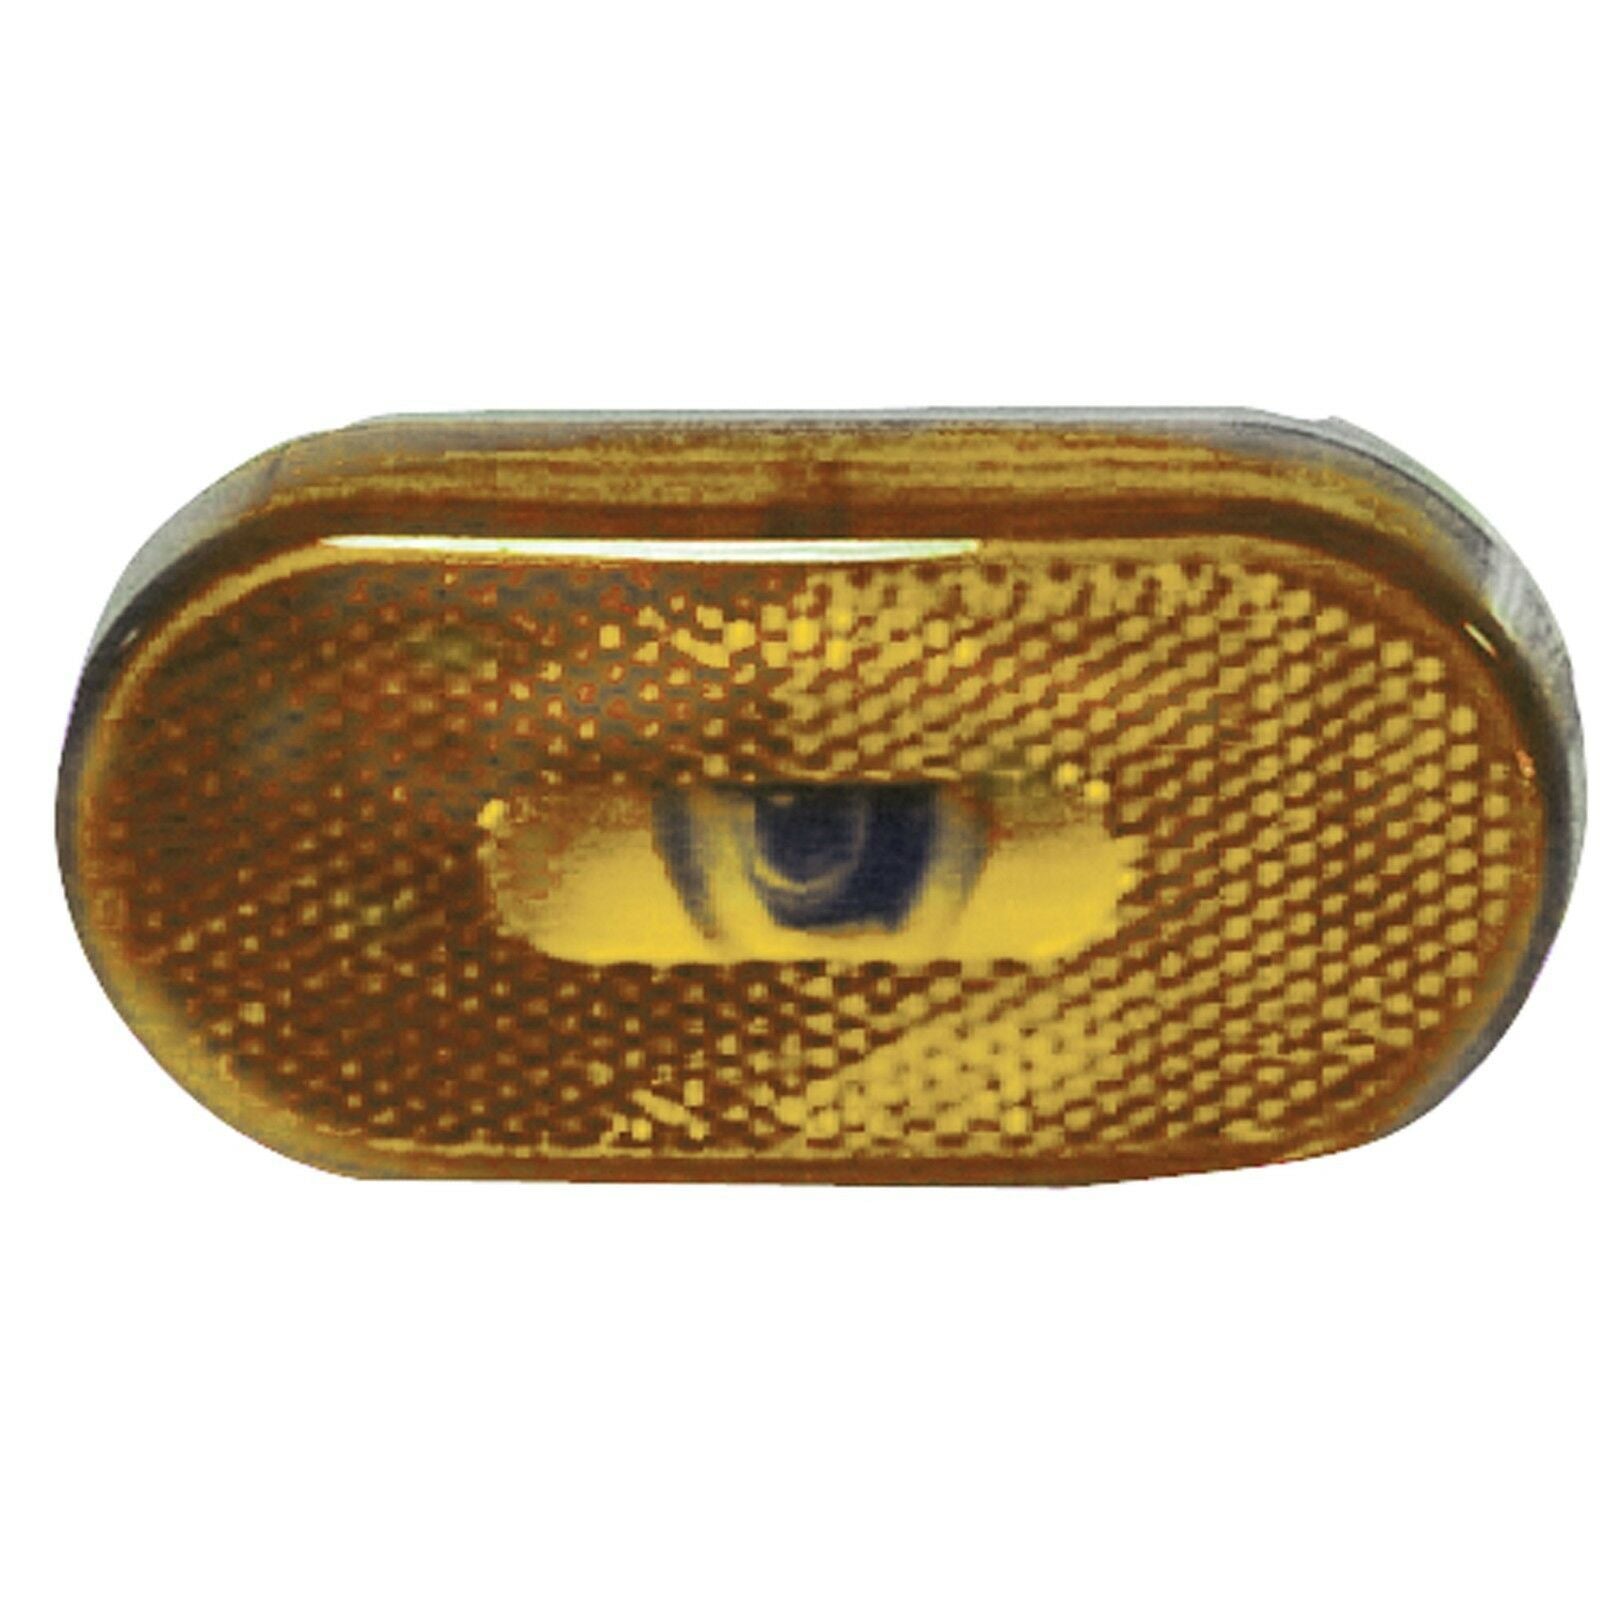 Fasteners Unlimited 003-53P - Replacement lens Amber clearance light